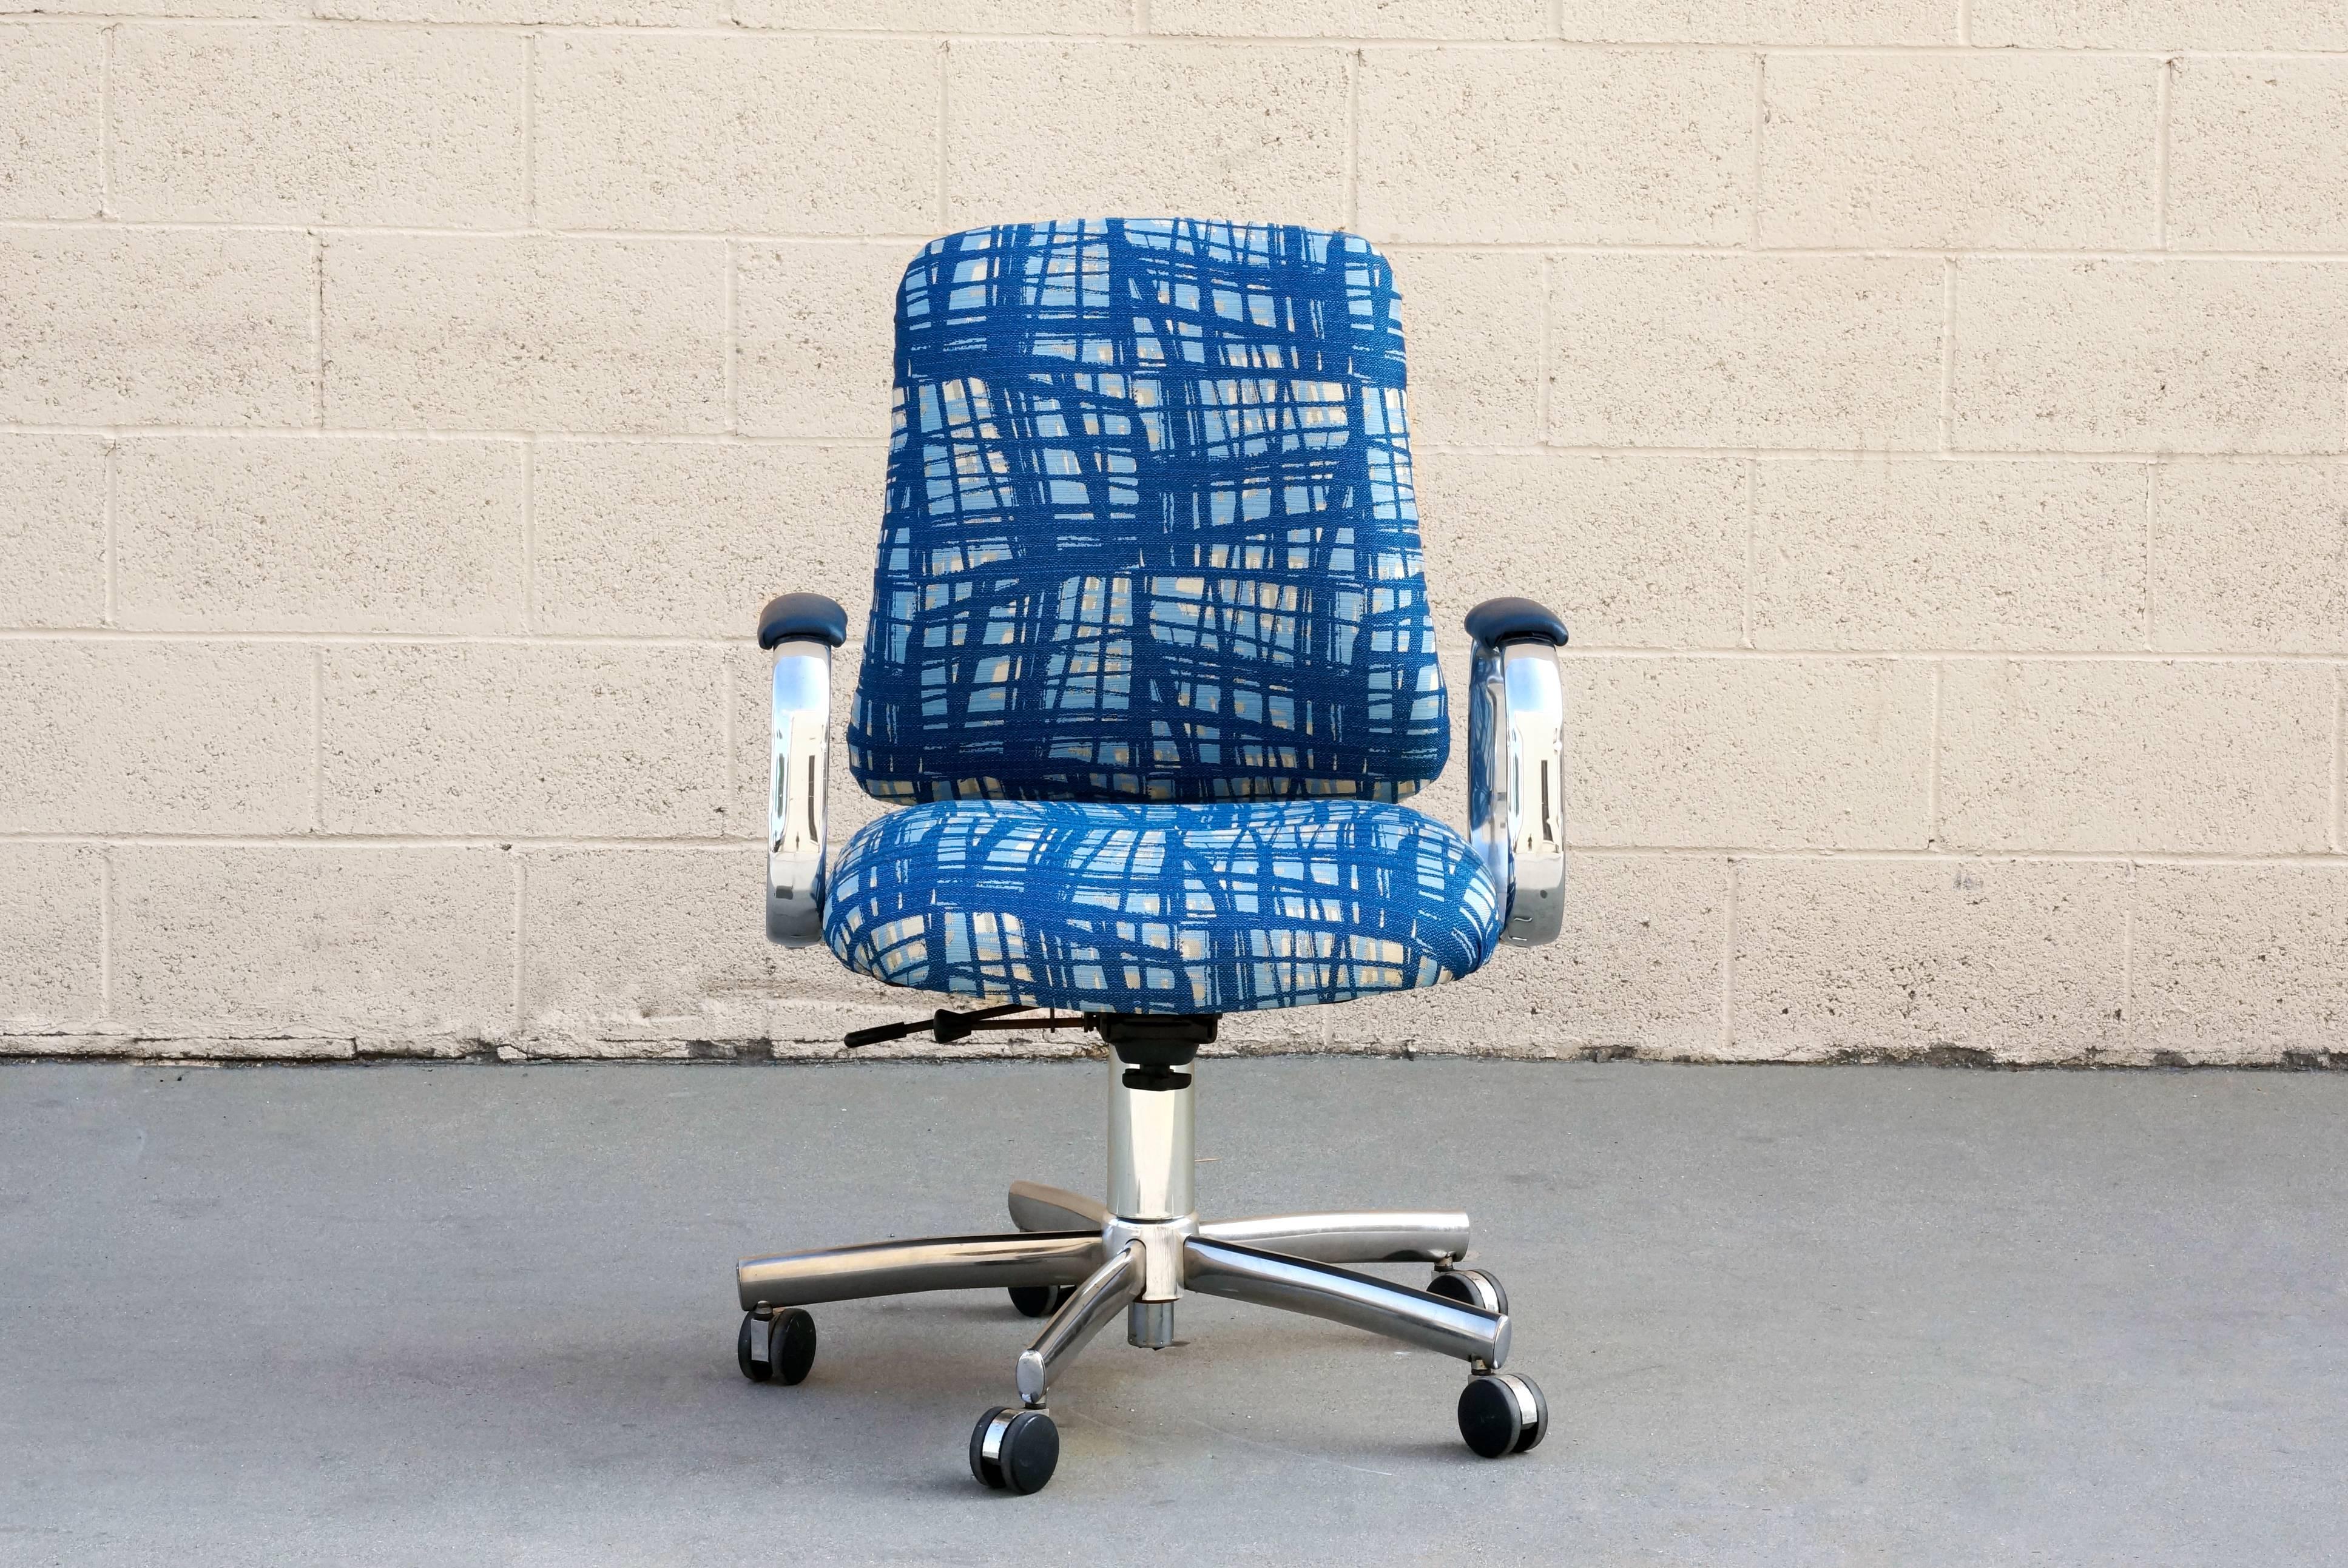 Vintage steel case executive steno, circa 1990s, with classic midcentury aesthetic. Features modernist chrome arms and base. Newly reupholstered in abstract blue woven fabric with blue vinyl armrests. Adjustable seat height. Tilts and swivels.